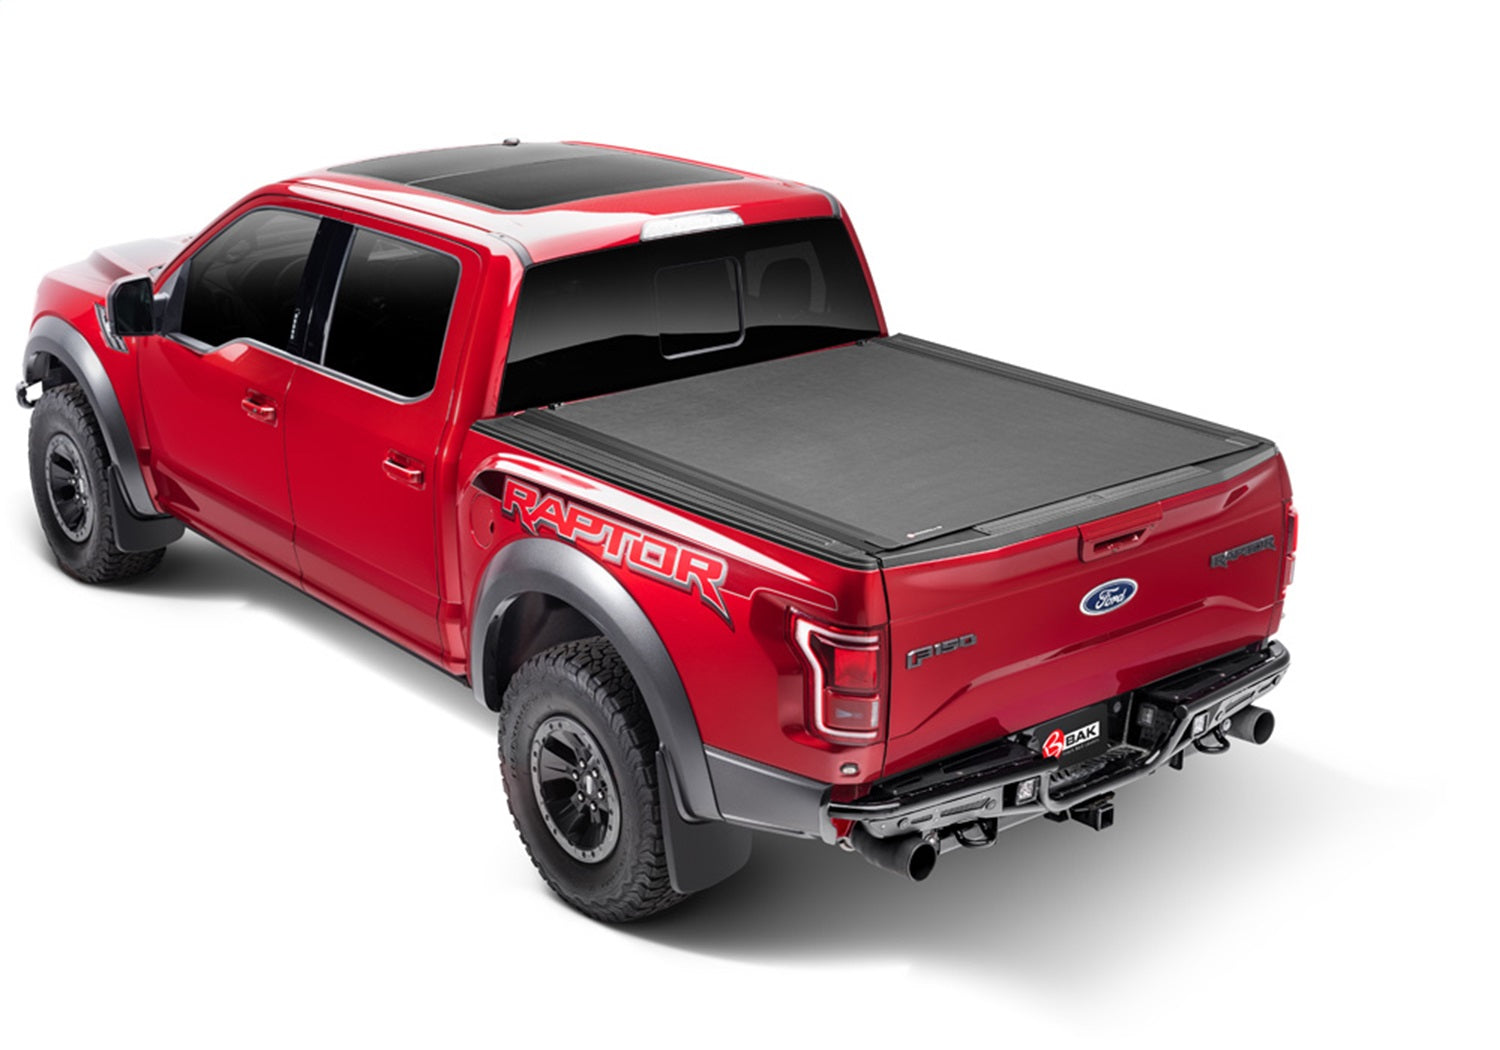 BAK Industries 80328 Revolver X4s Hard Rolling Truck Bed Cover Fits 15-20 F-150